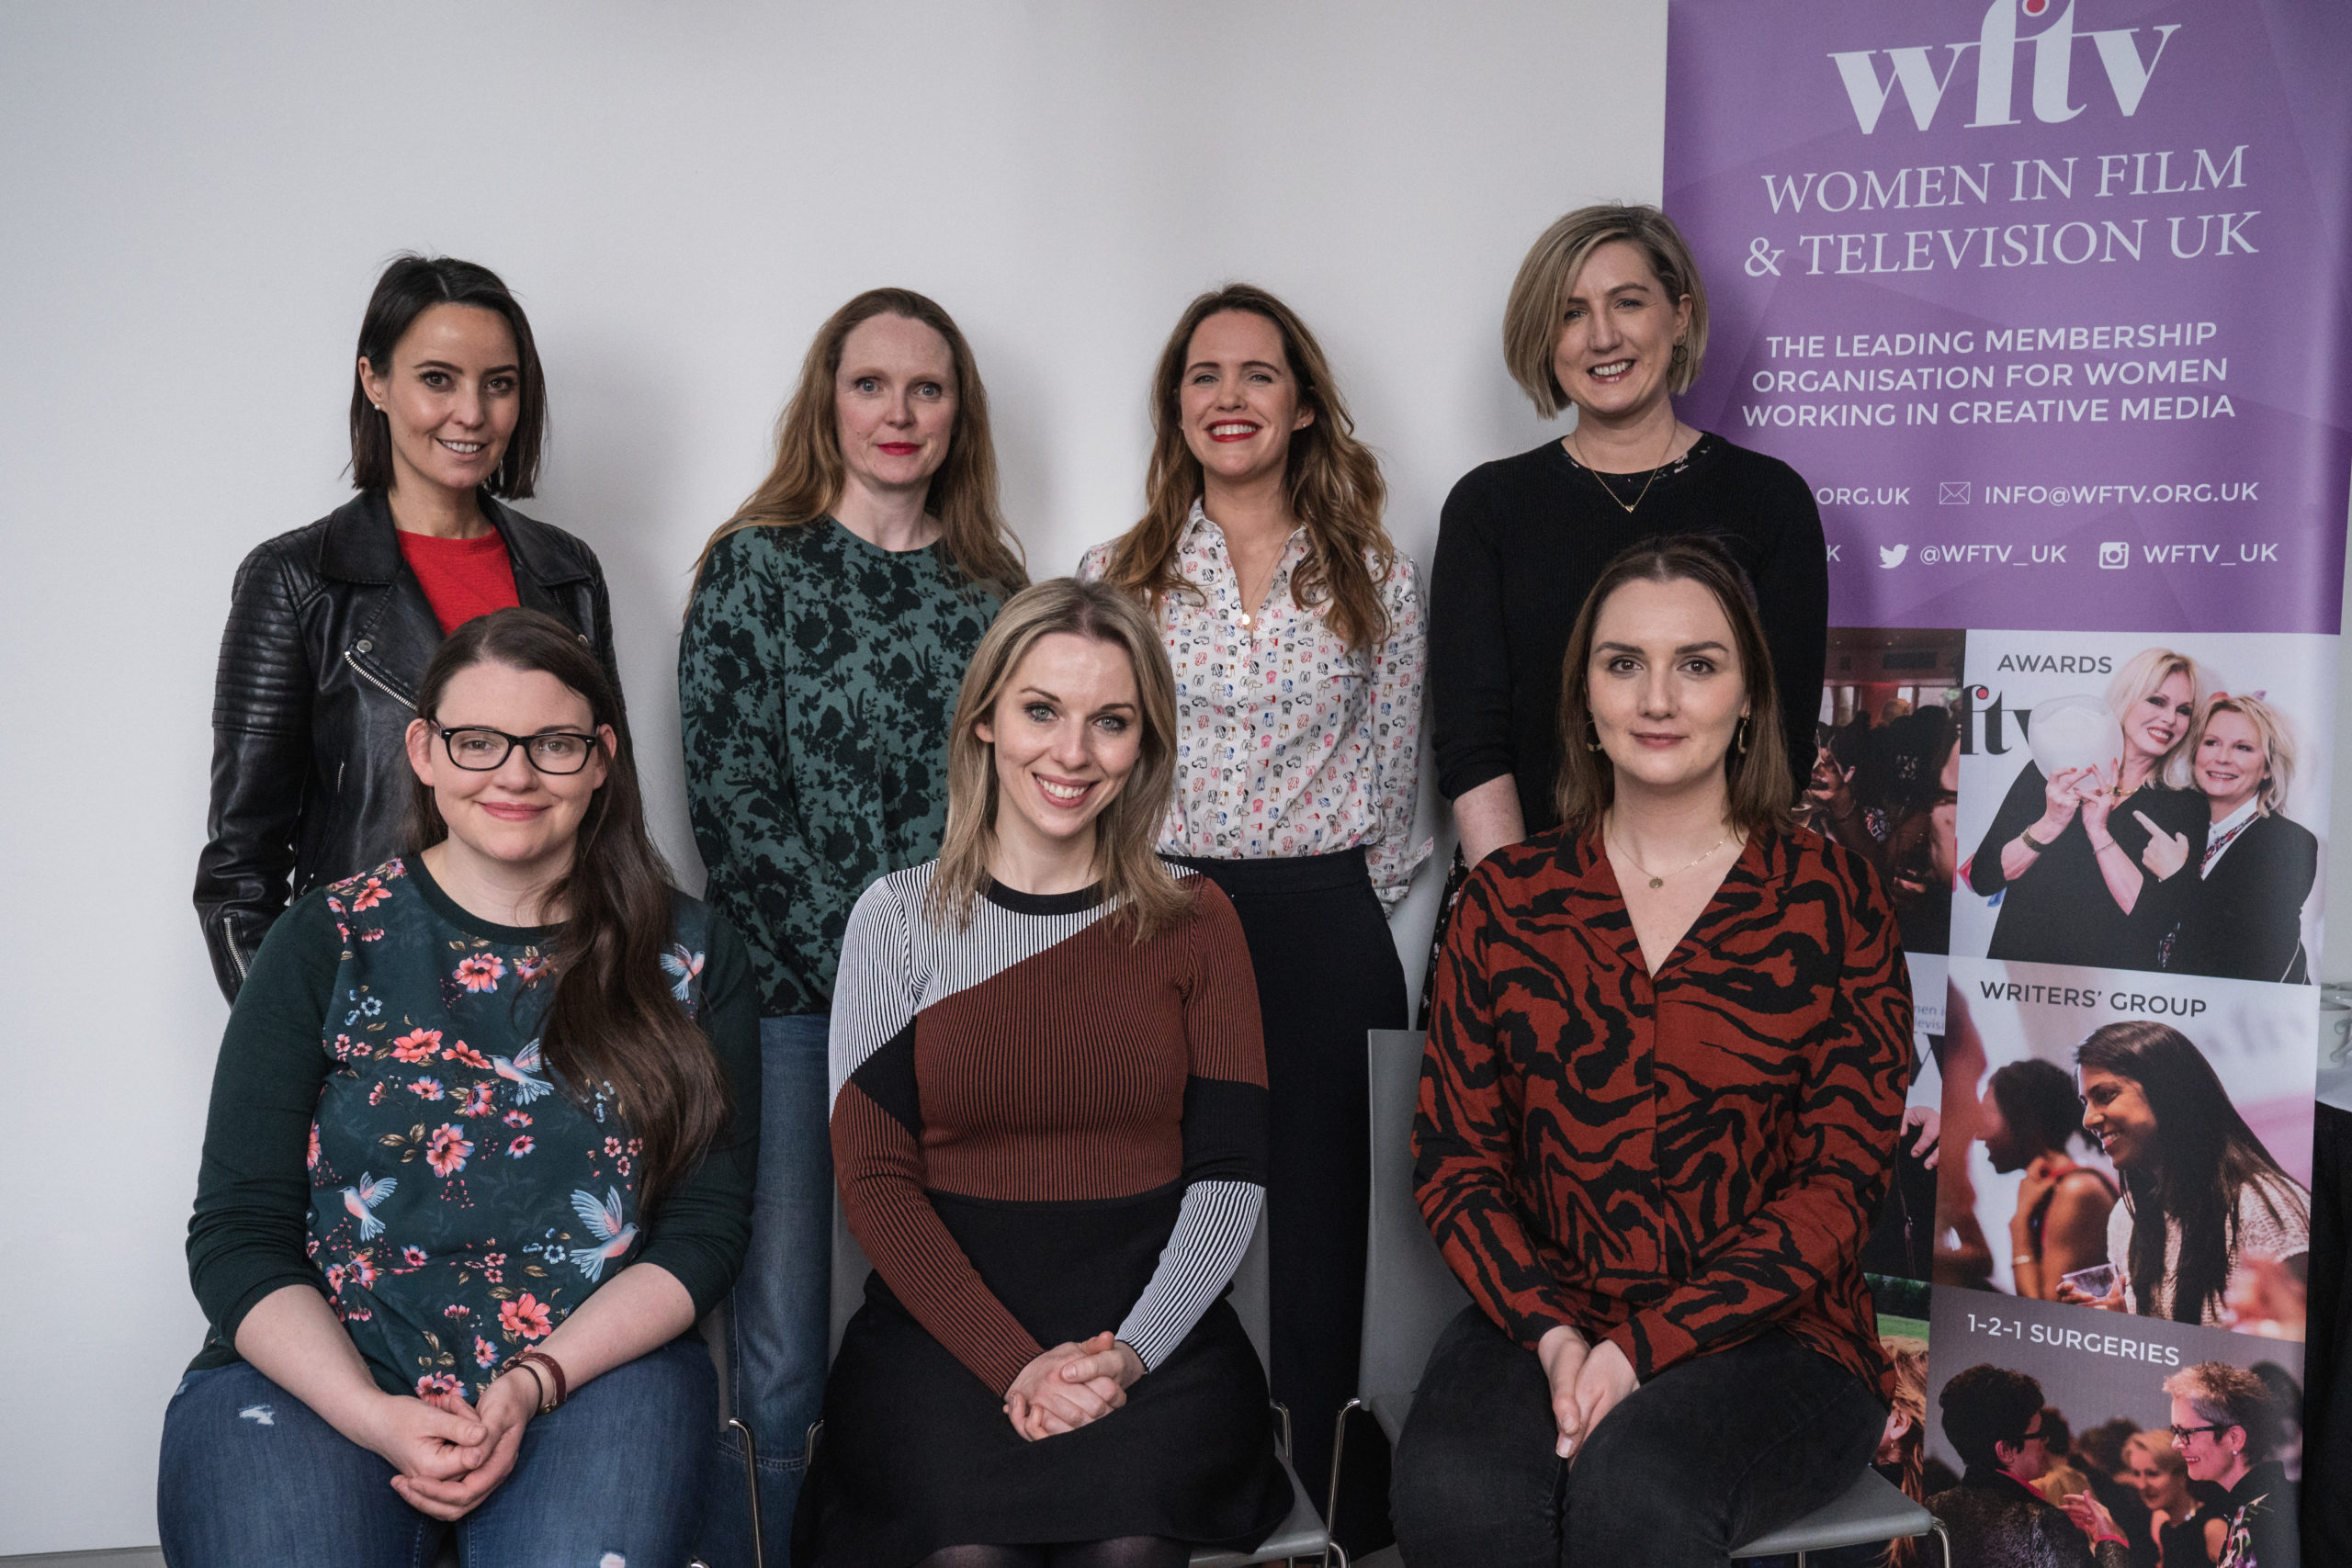 Pictured at the launch of the WFTV NI inaugural mentoring scheme are mentees (l to r) (back row) Milène Fegan, Dee Harvey, Karen Donnelly and Niamh Minihan with (front row) Margaret McGoldrick, Sarah McCaffrey, WFTV NI Mentoring Scheme Producer and Grace Sweeney.